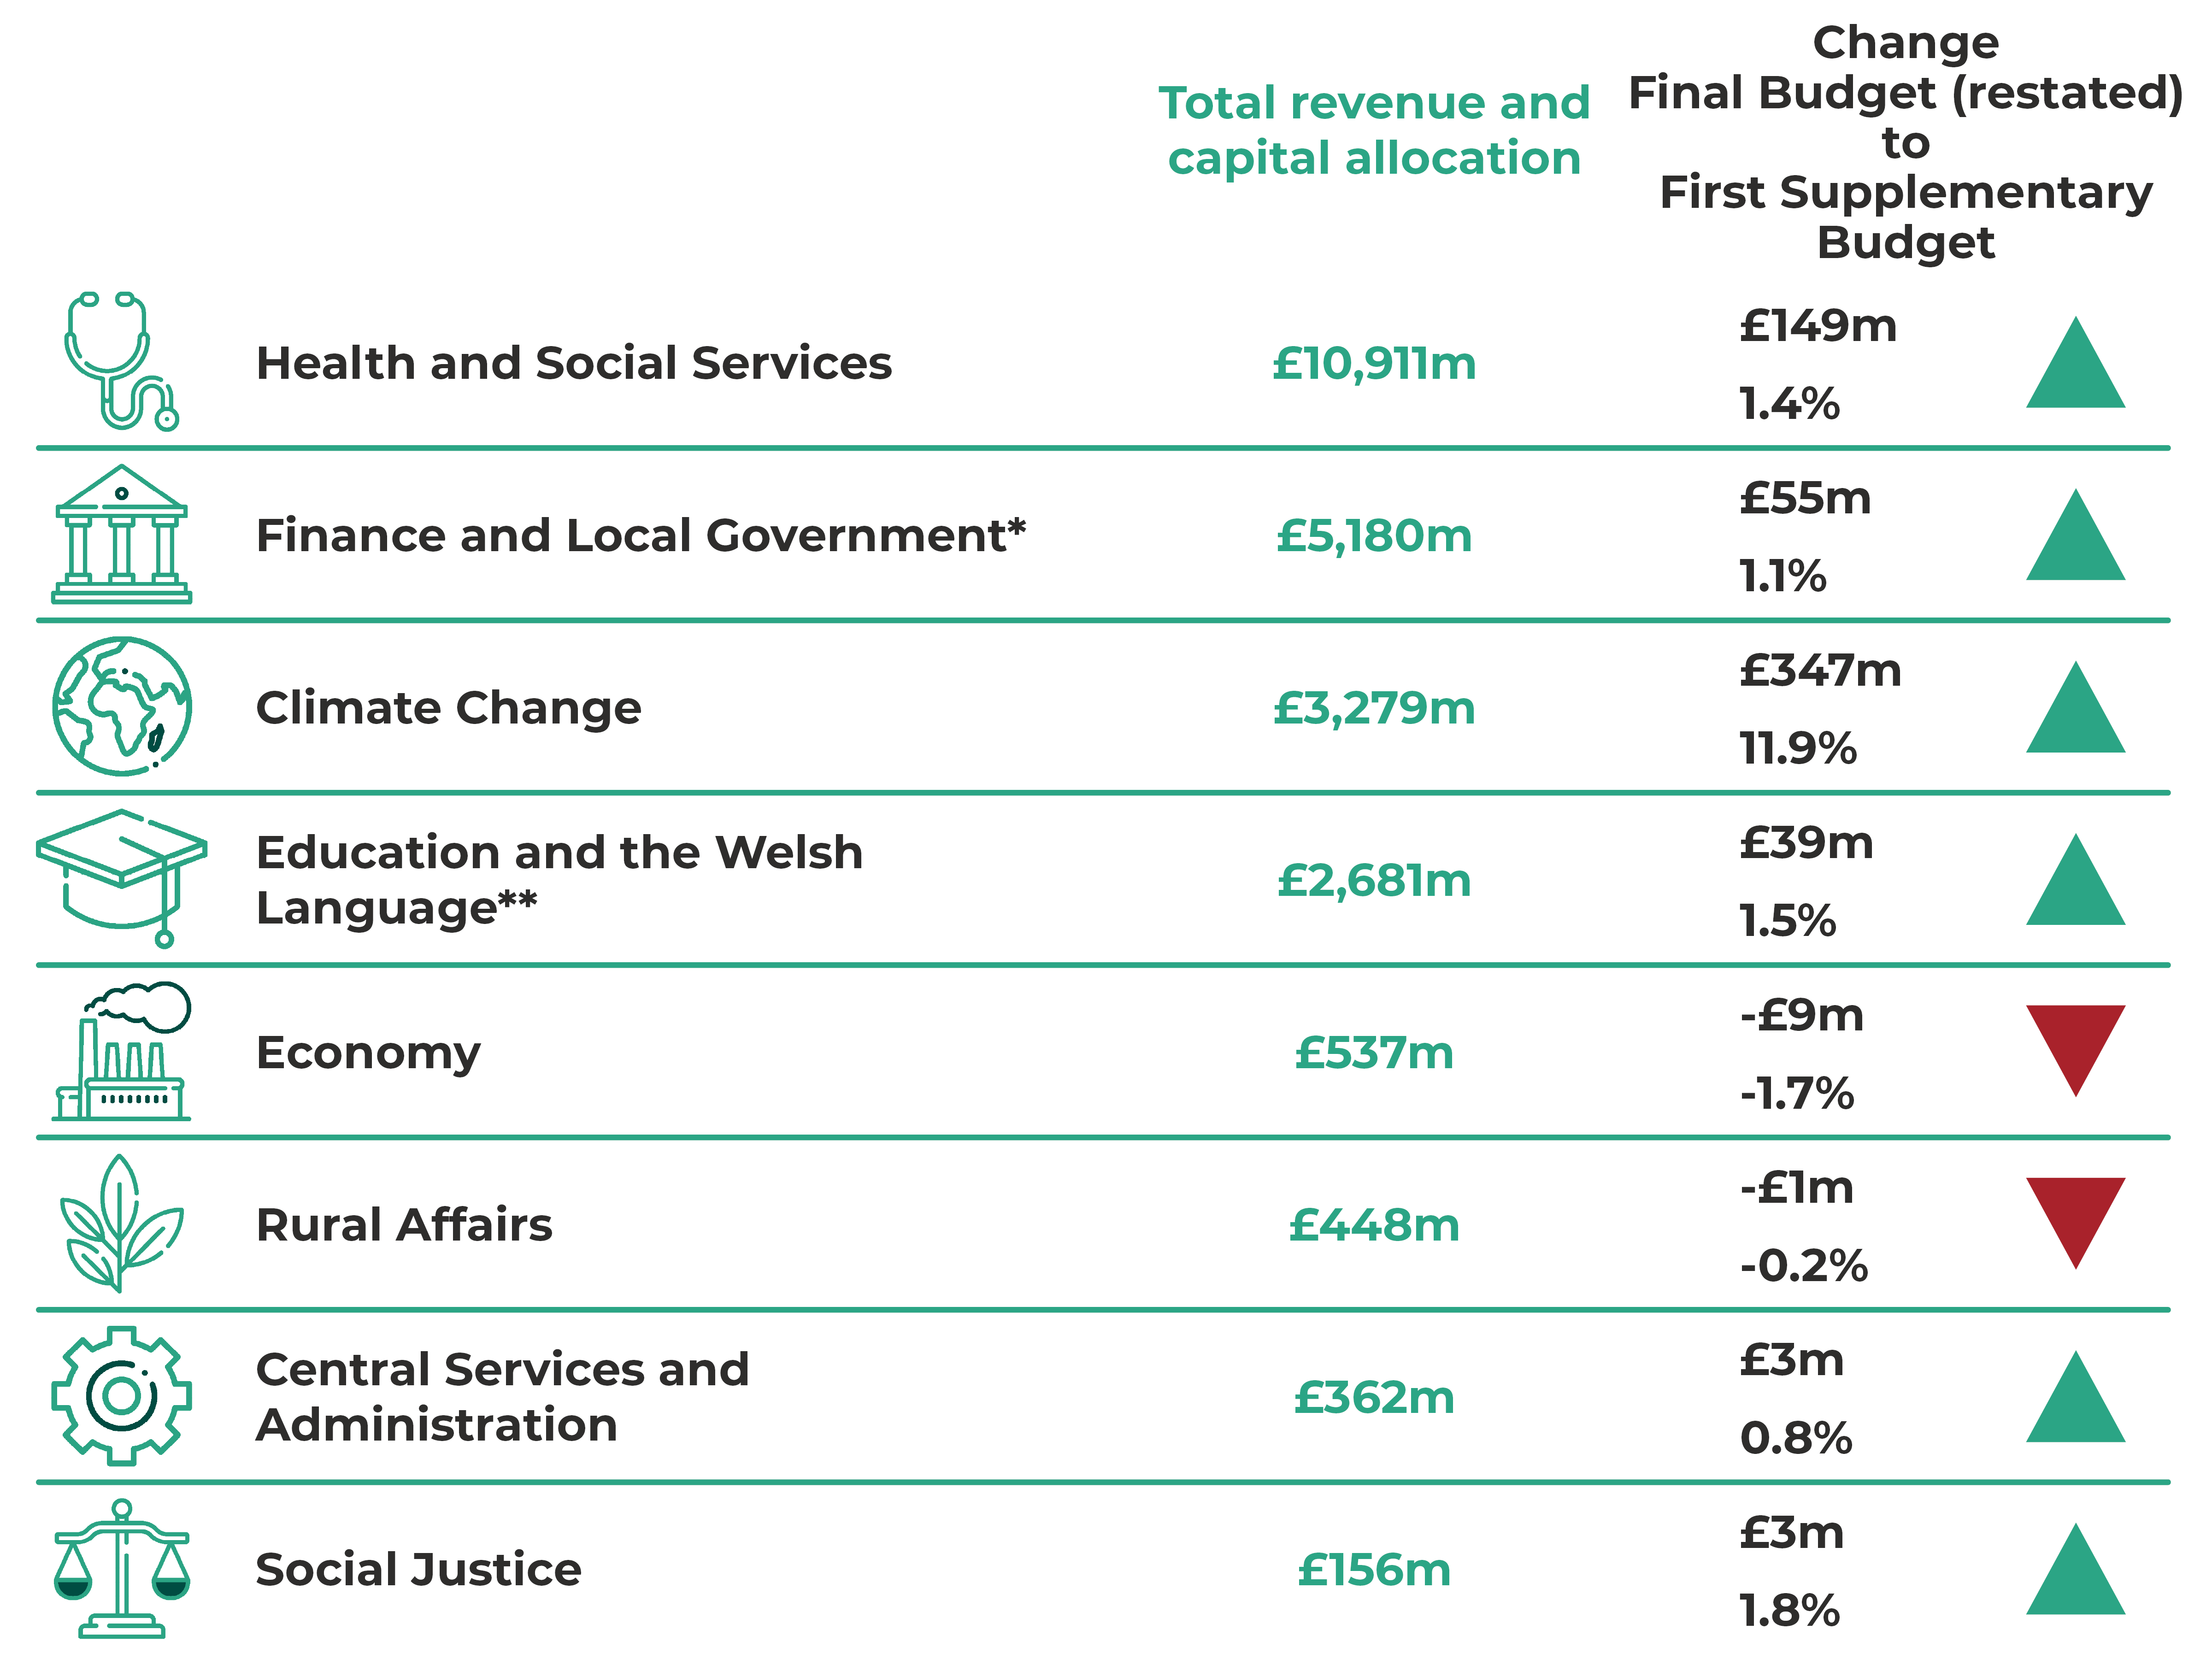 2023-24 First Supplementary Budget revenue and capital by portfolio and changes from 2023-24 Final Budget (restated). Health and Social Services £10,911m, up £149m (1.4%). Finance and Local Government £5,180m, up £55m (1.1%). Climate Change £3,279m, up £347m (11.9%). Education and the Welsh Language £2,681m, up £39m (1.5%). Economy £537m, down -£9m (-1.7%). Rural Affairs £448m, down -£1m (-0.2%). Central Services and Administration £362m, up £3m (0.8%). Social Justice £156m, up £3m (1.8%).  * Excludes around £0.9 billion non-domestic rates income. ** Includes allocation of £488 million of non-fiscal revenue due to student loans. Figures are rounded. Refer to the Welsh Government First Supplementary Budget 2023-24 for exact figures.